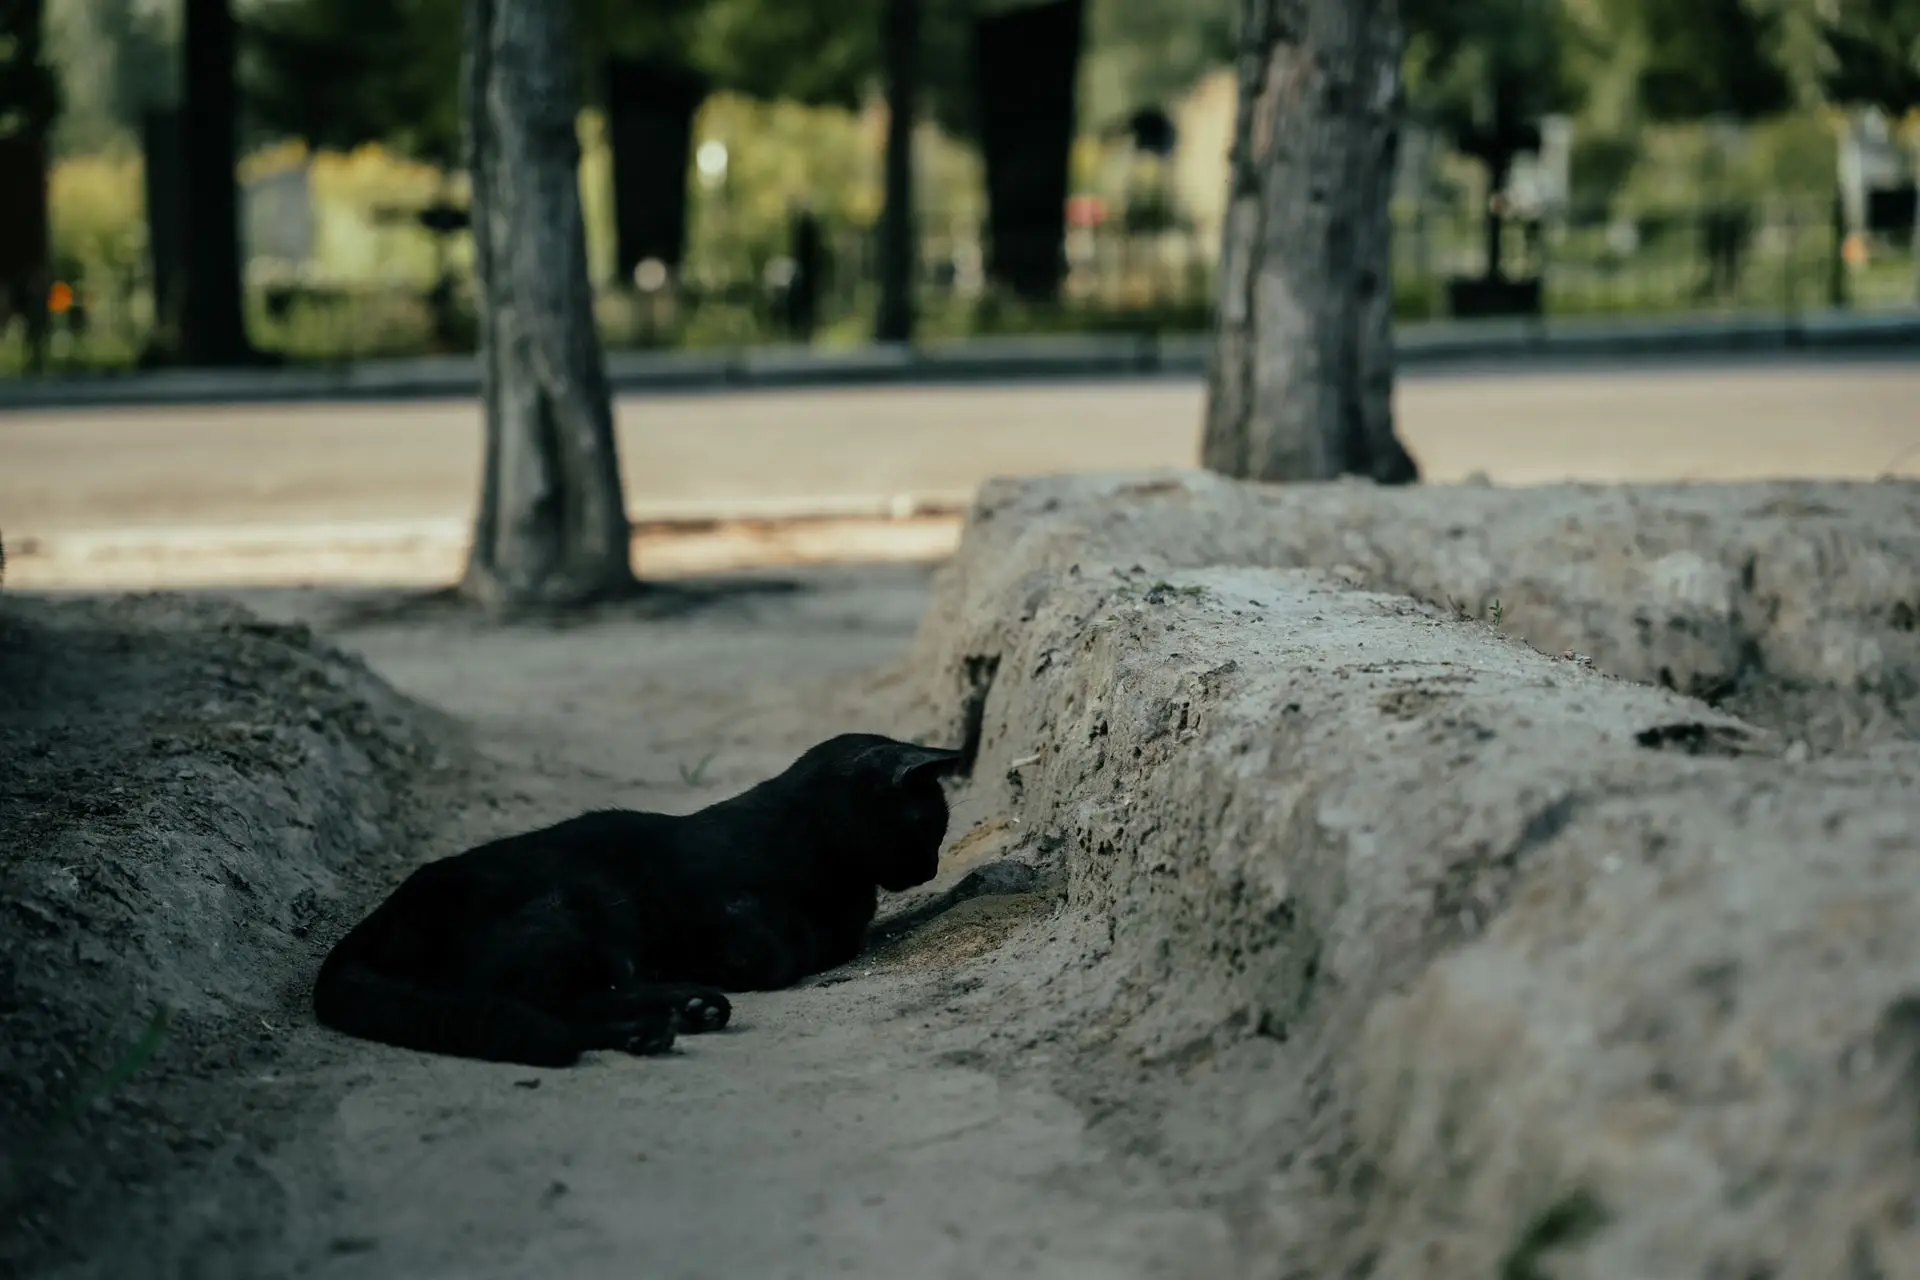 A black cat that seemed to appear out of nowhere at the cemetery